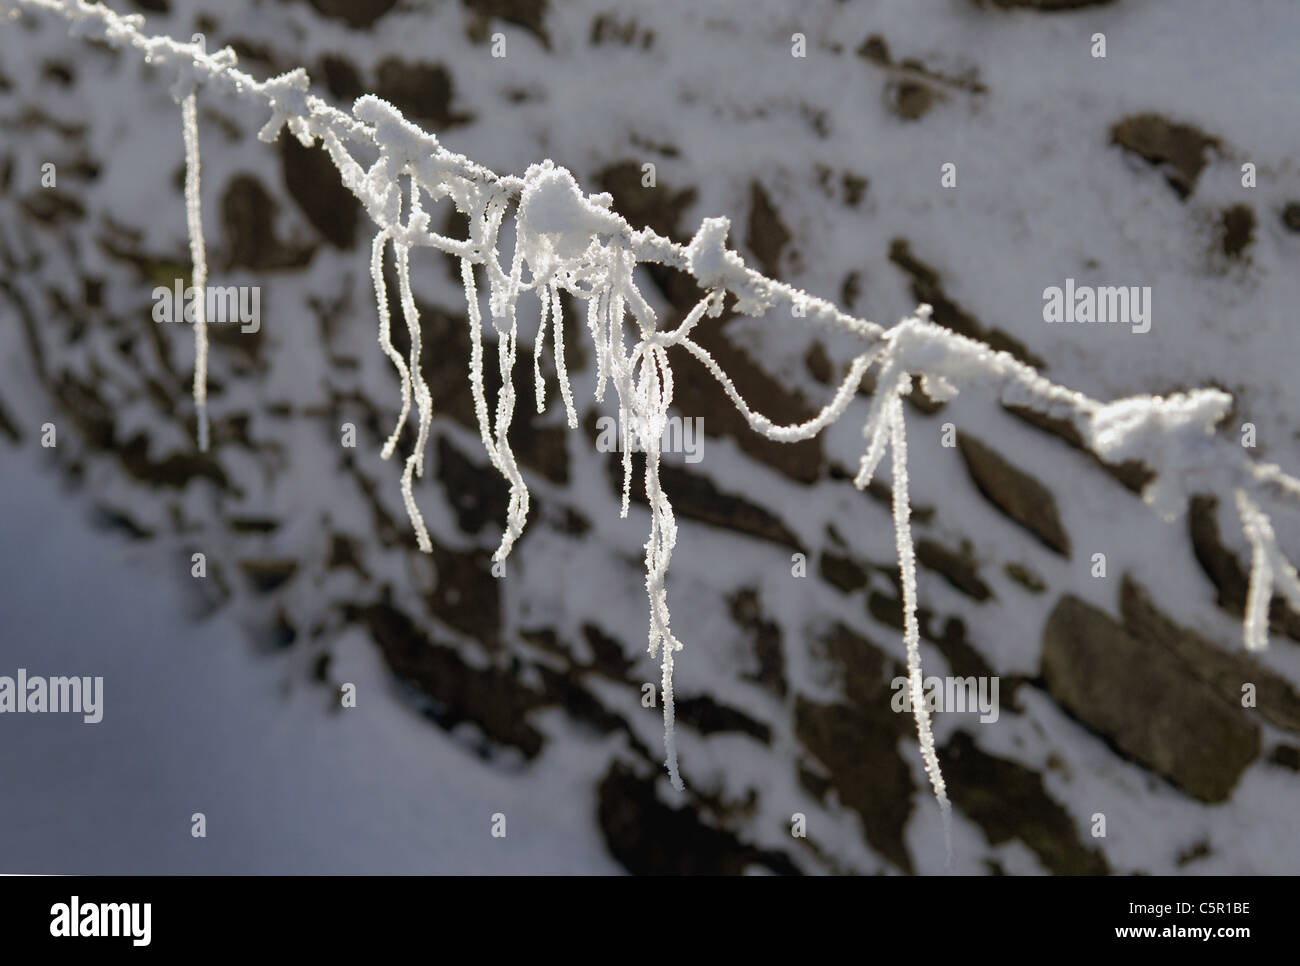 Frozen, snow covered sheep fleece on barbed wire in winter sun. Stock Photo